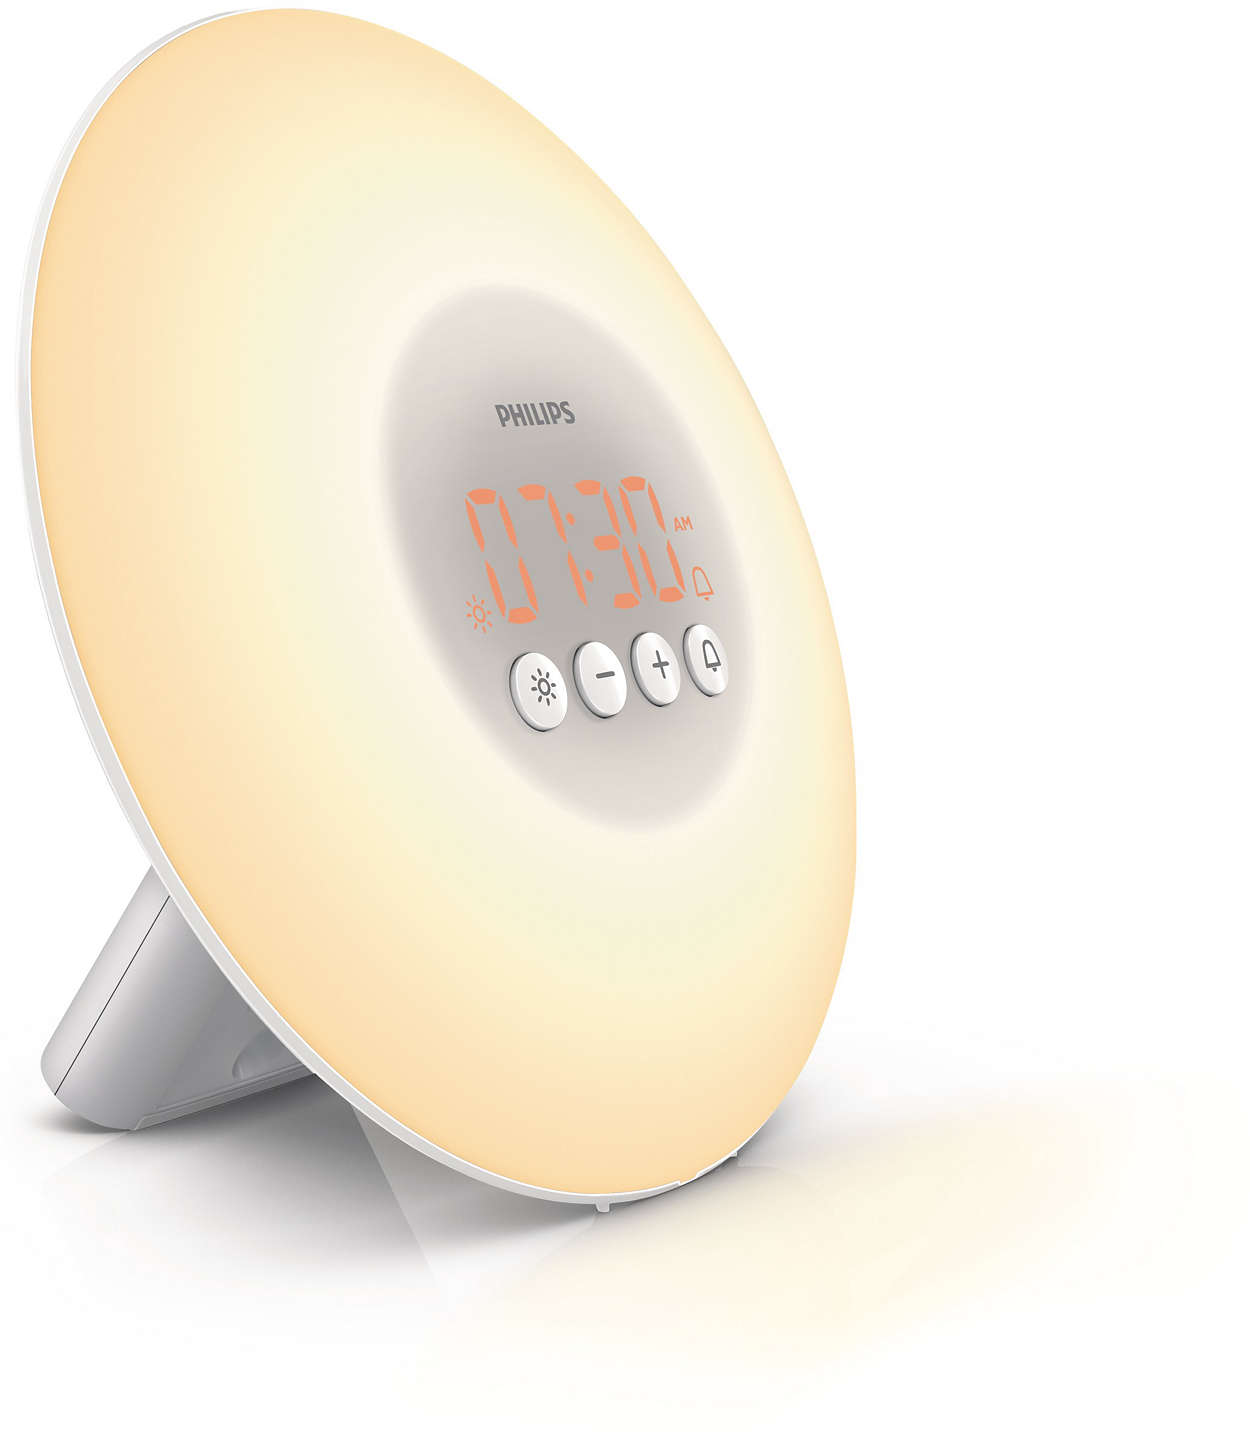 Philips alarm clock uses light to help you wake up naturally.